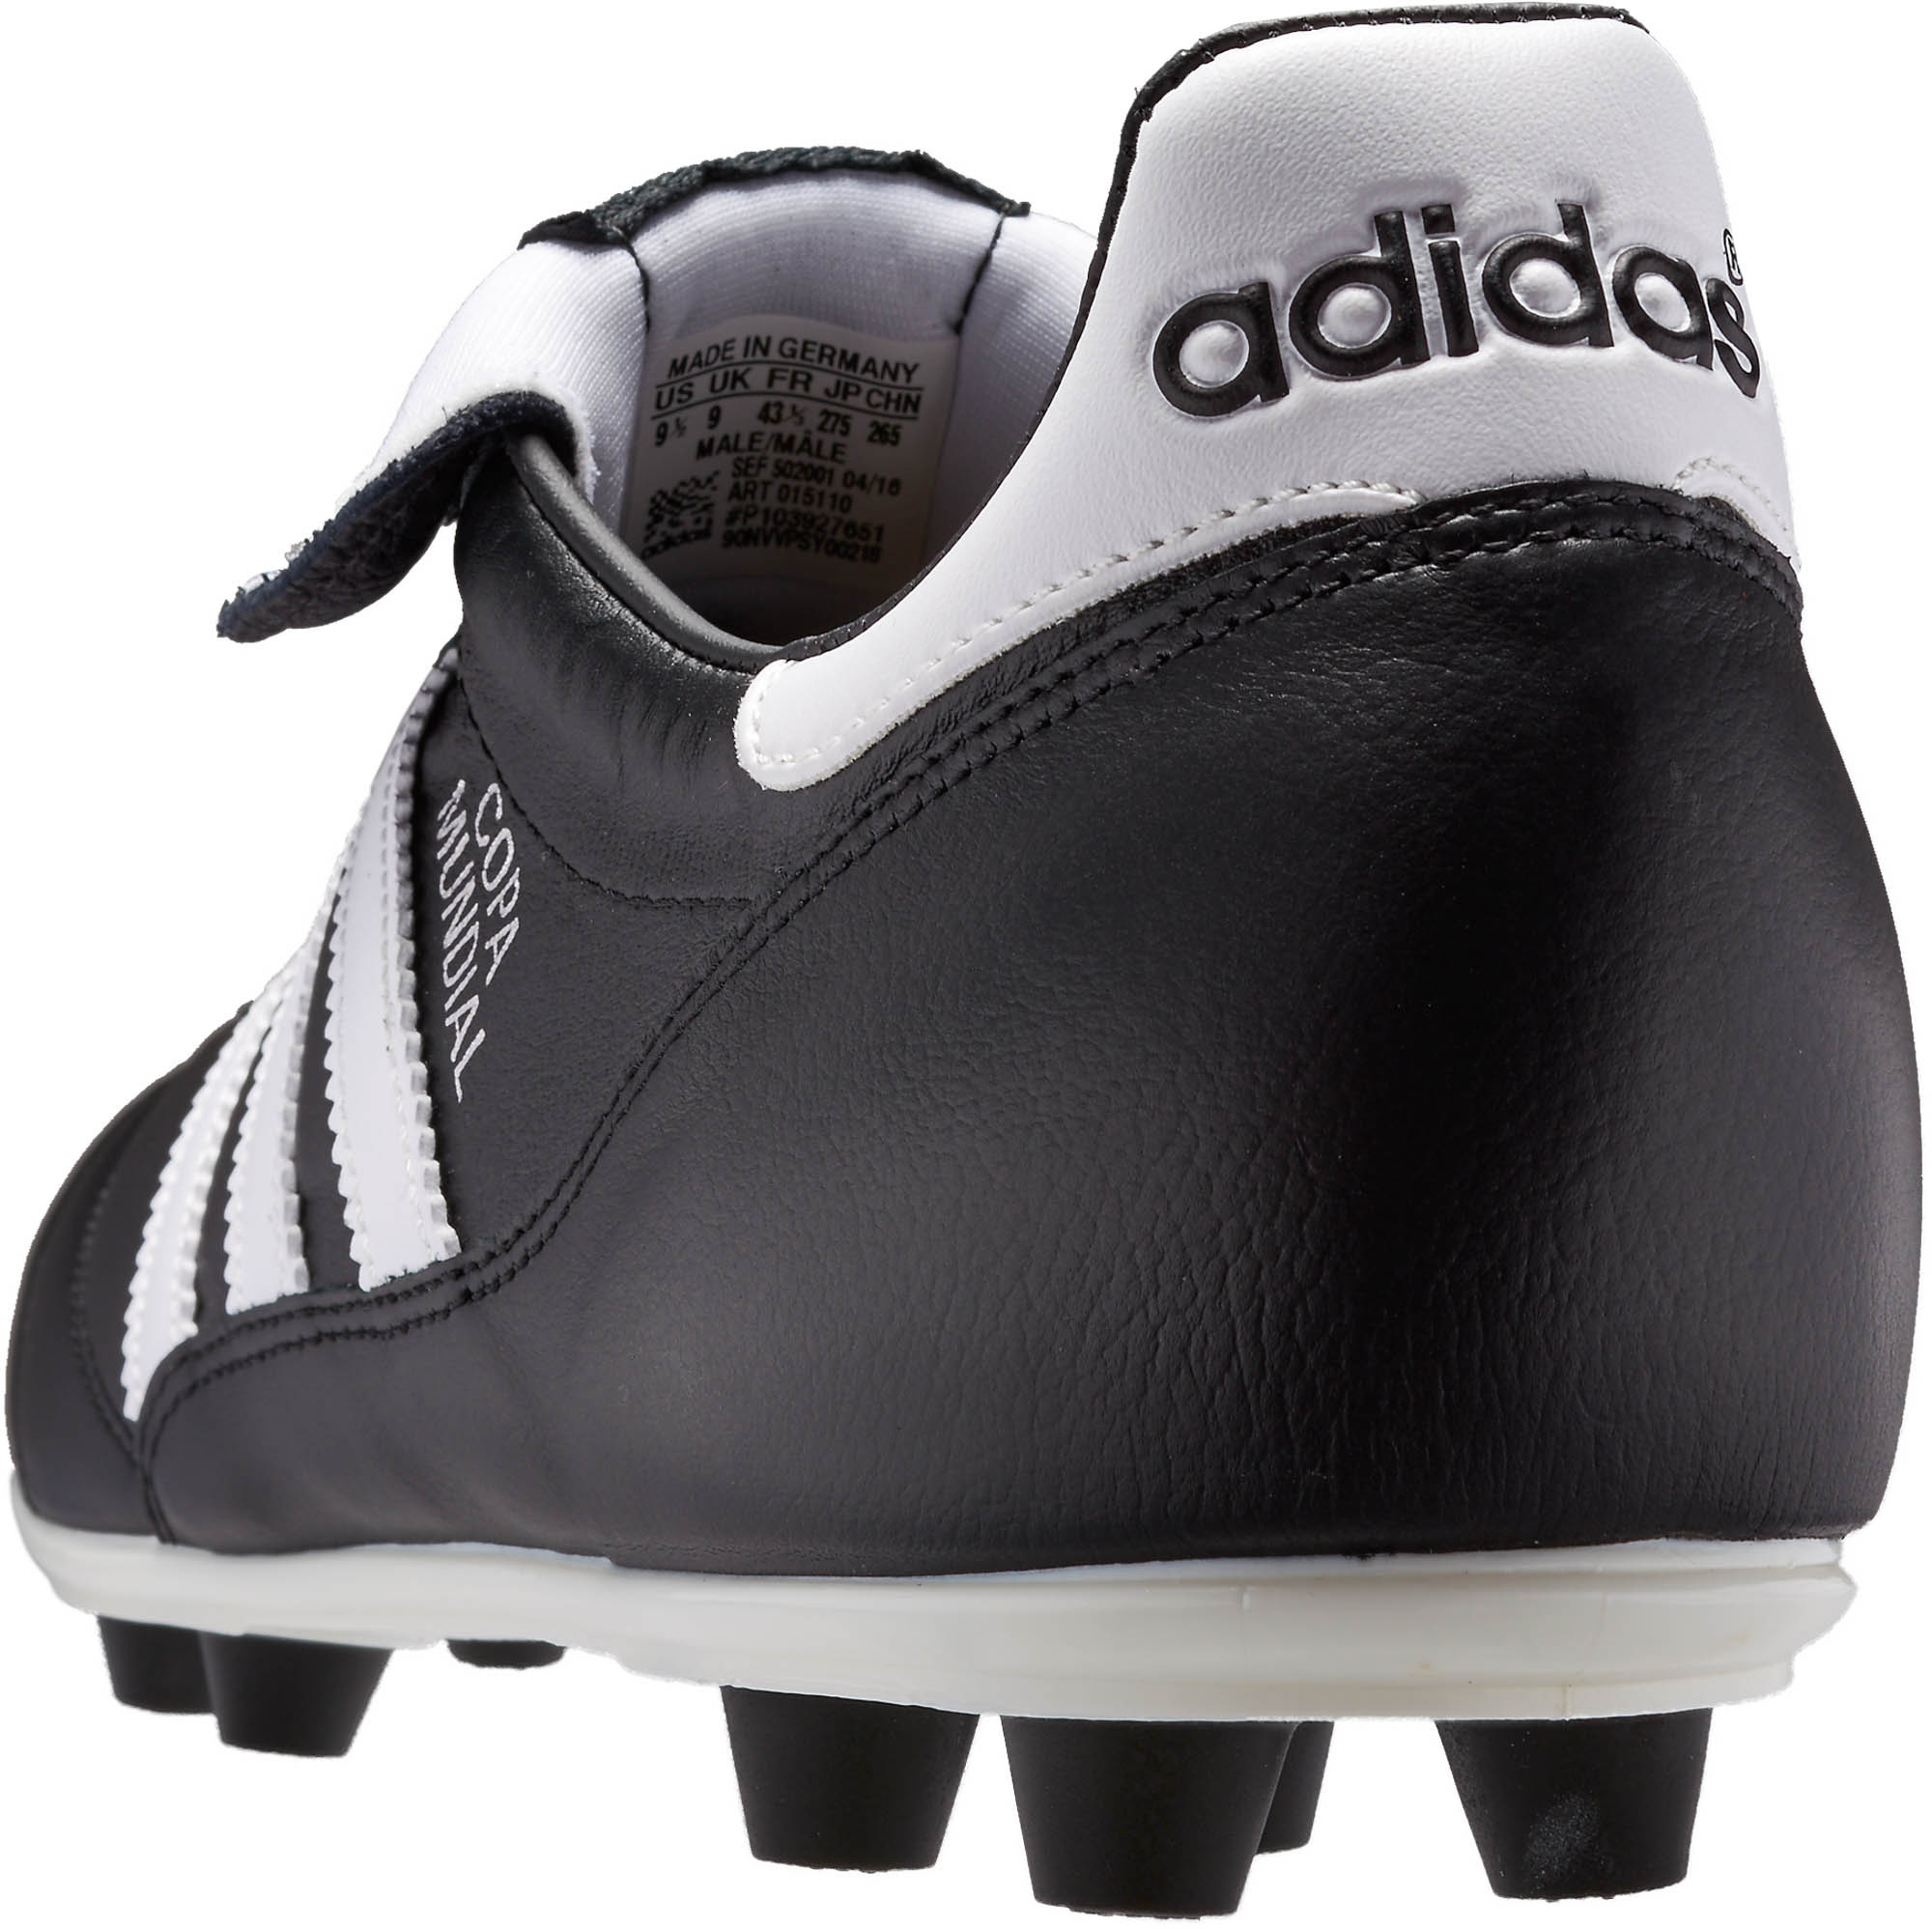 adidas copa mundial youth soccer shoes